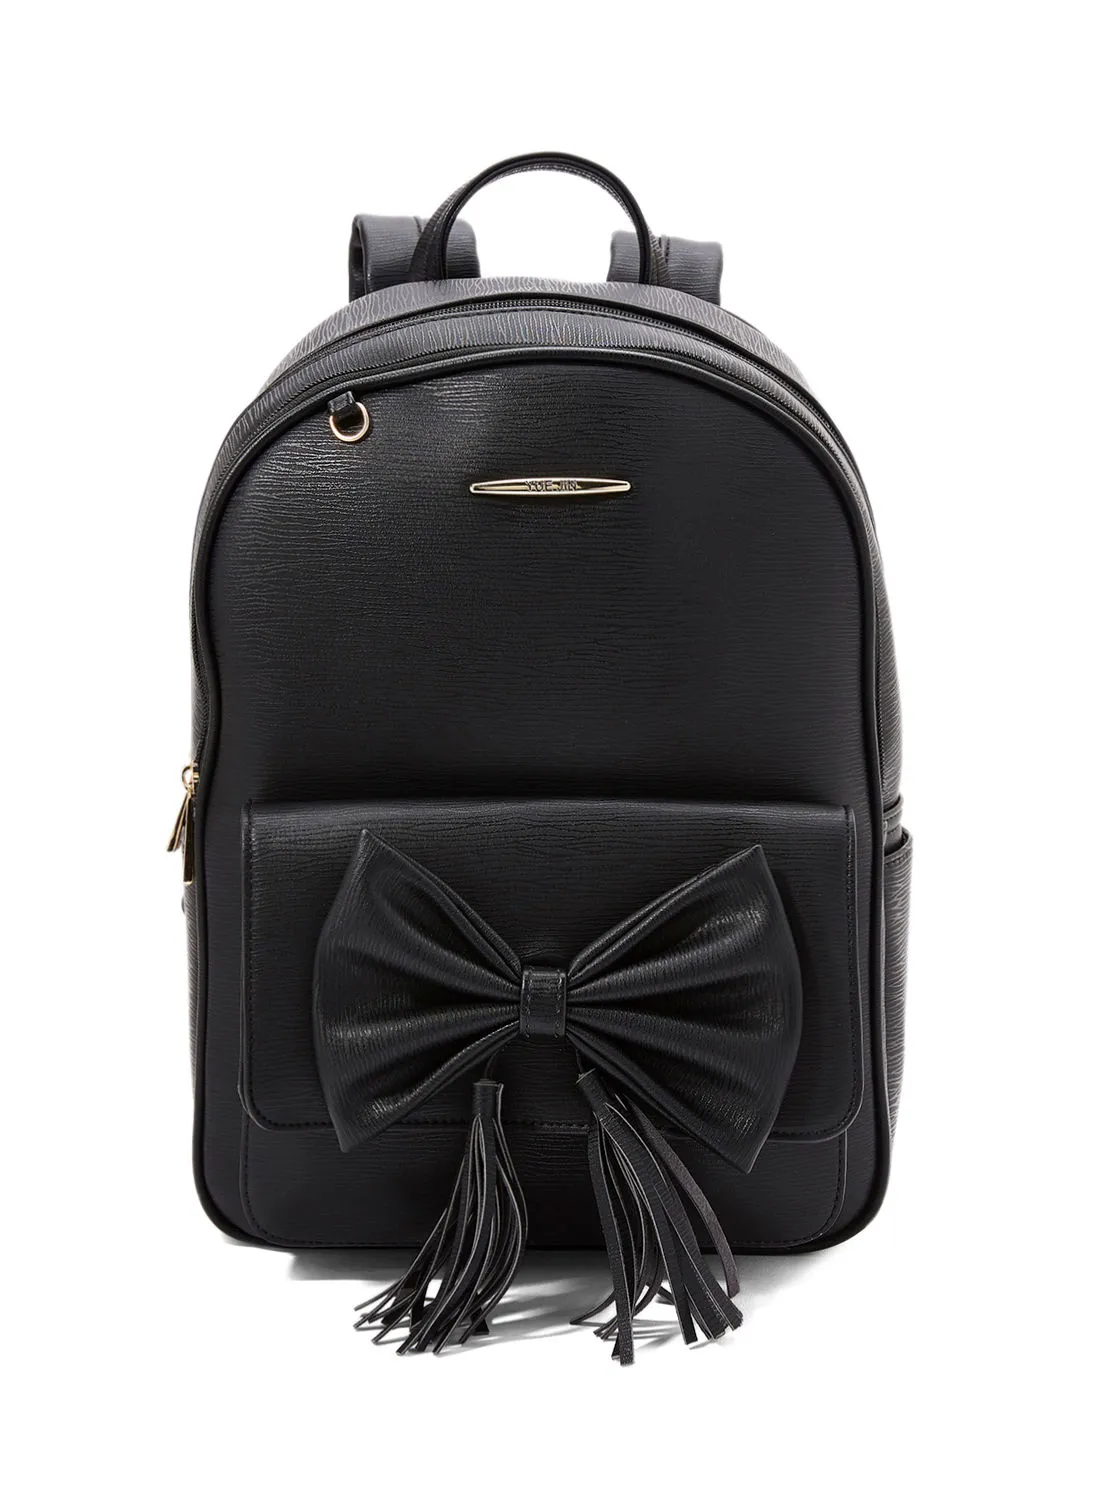 YUEJIN Faux Leather Backpack Black